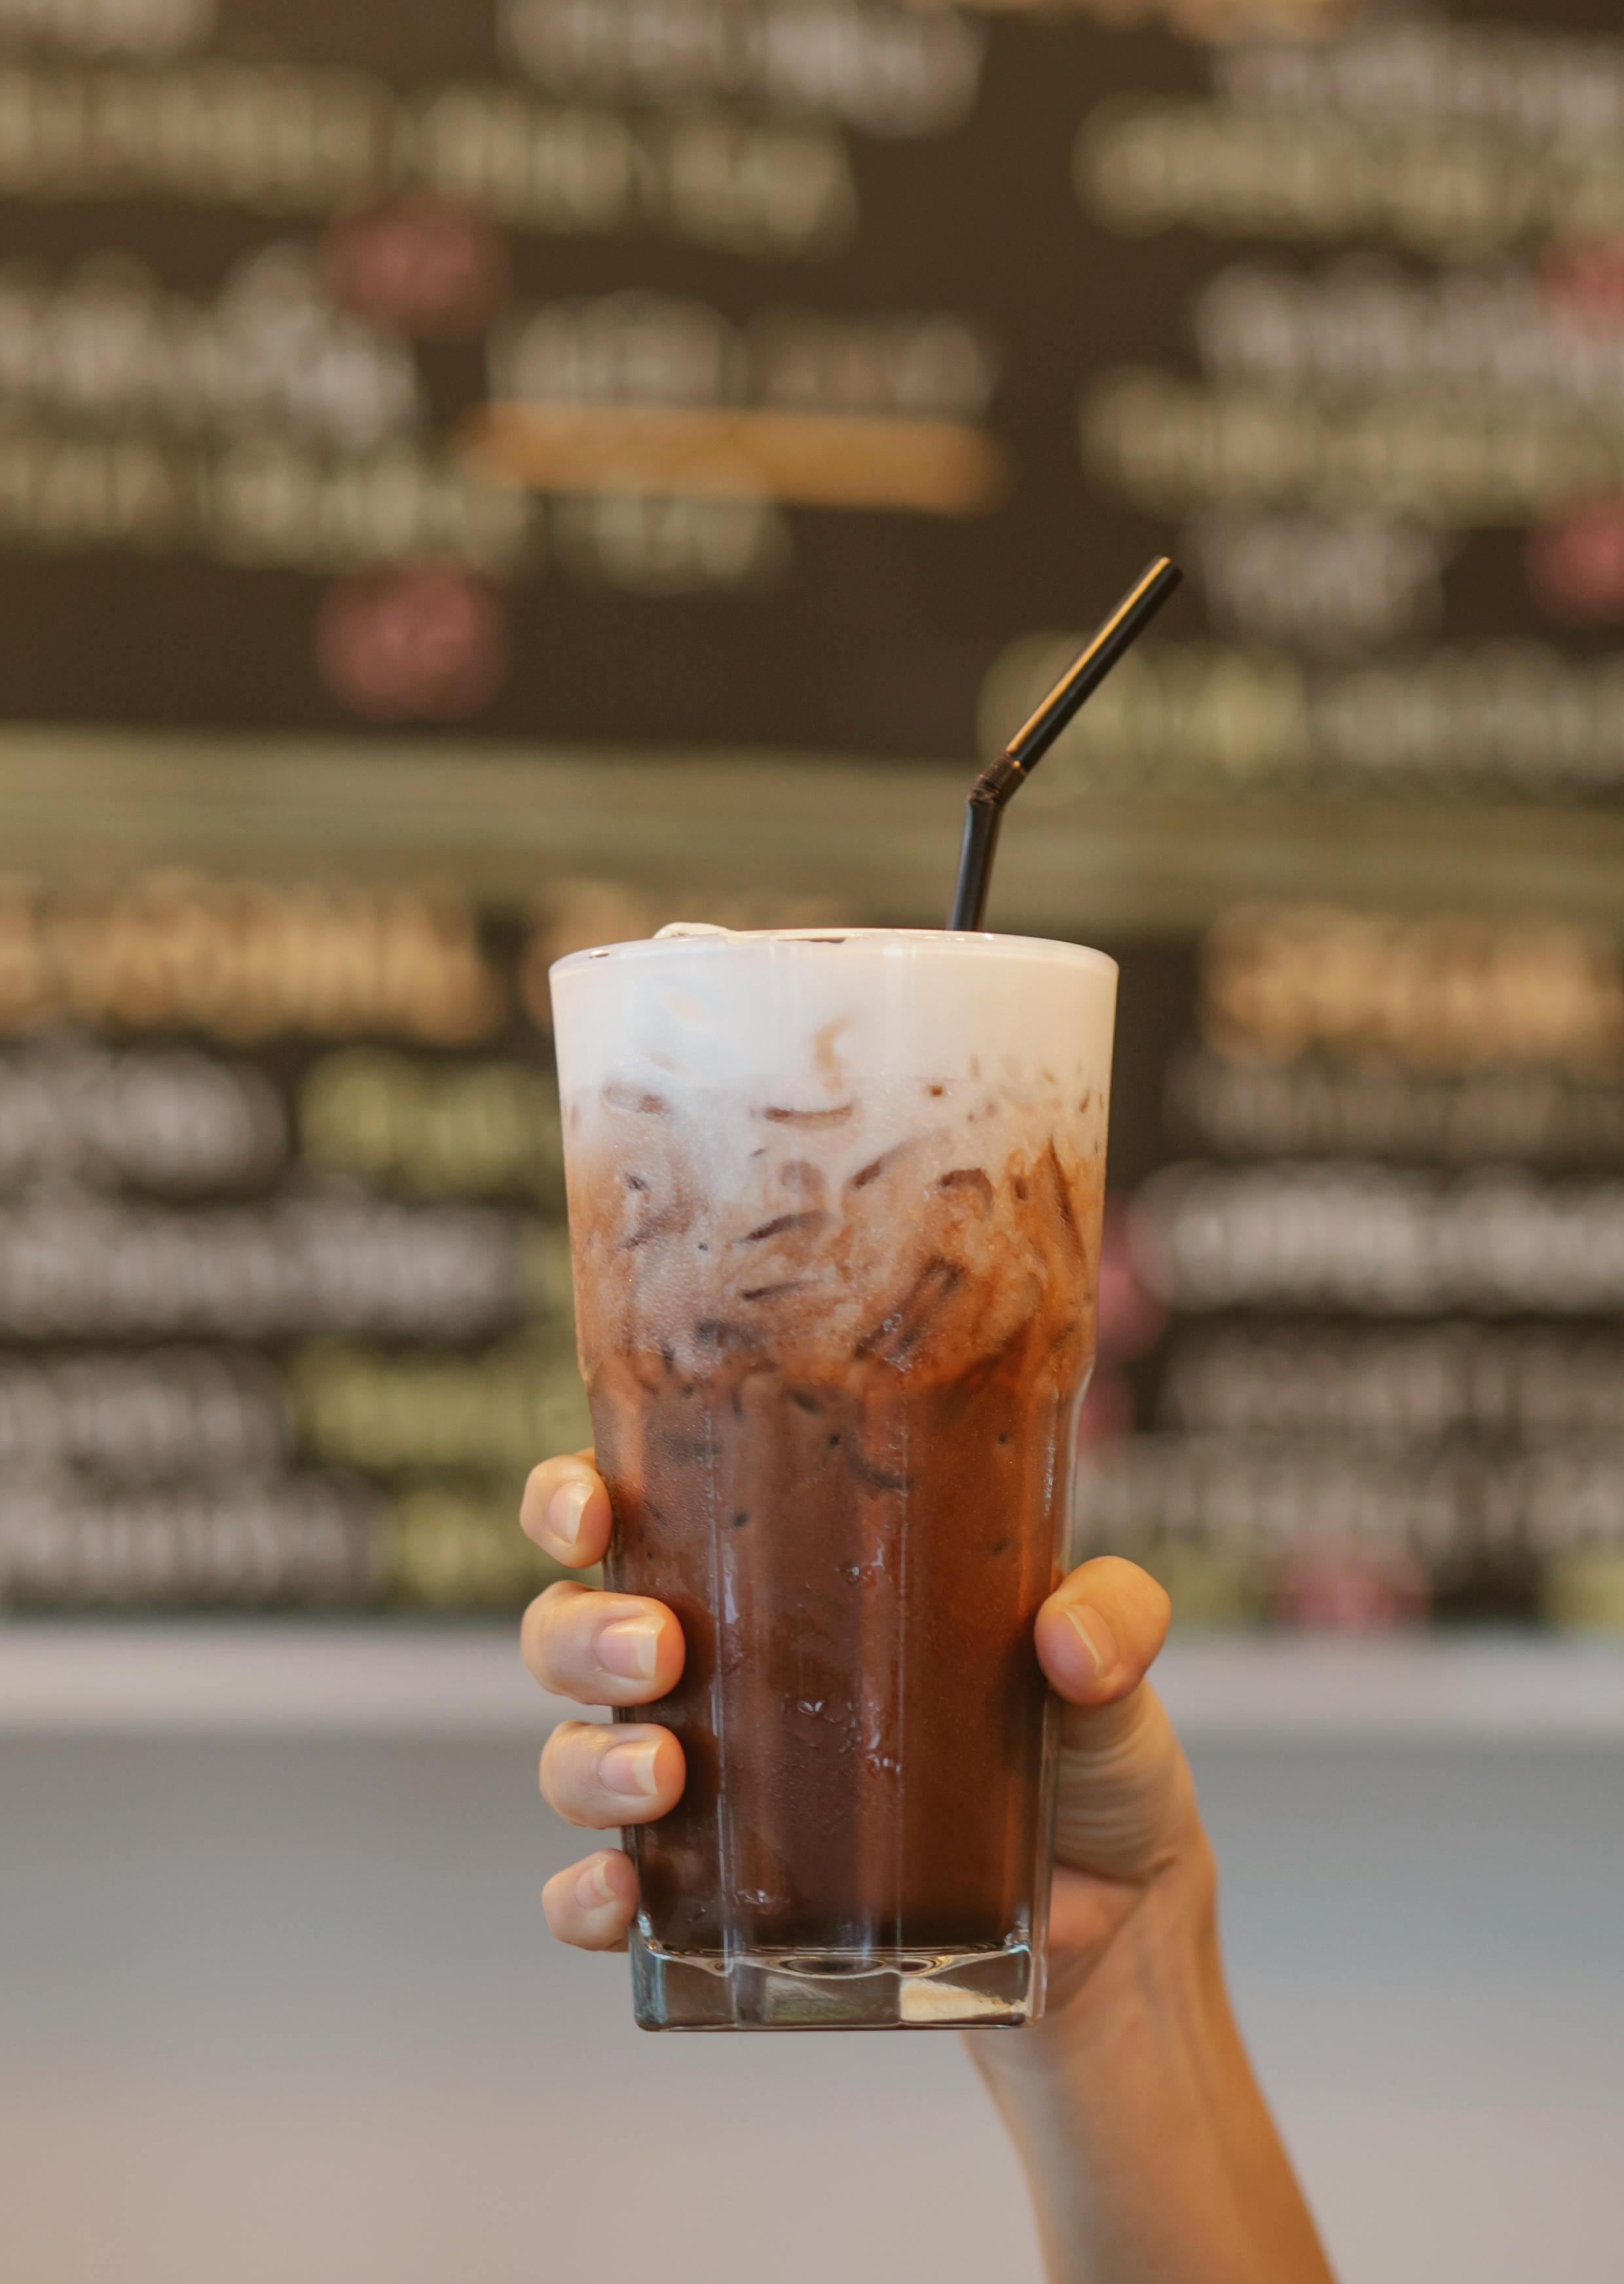 Cold Coffee Photos, Download The BEST Free Cold Coffee Stock